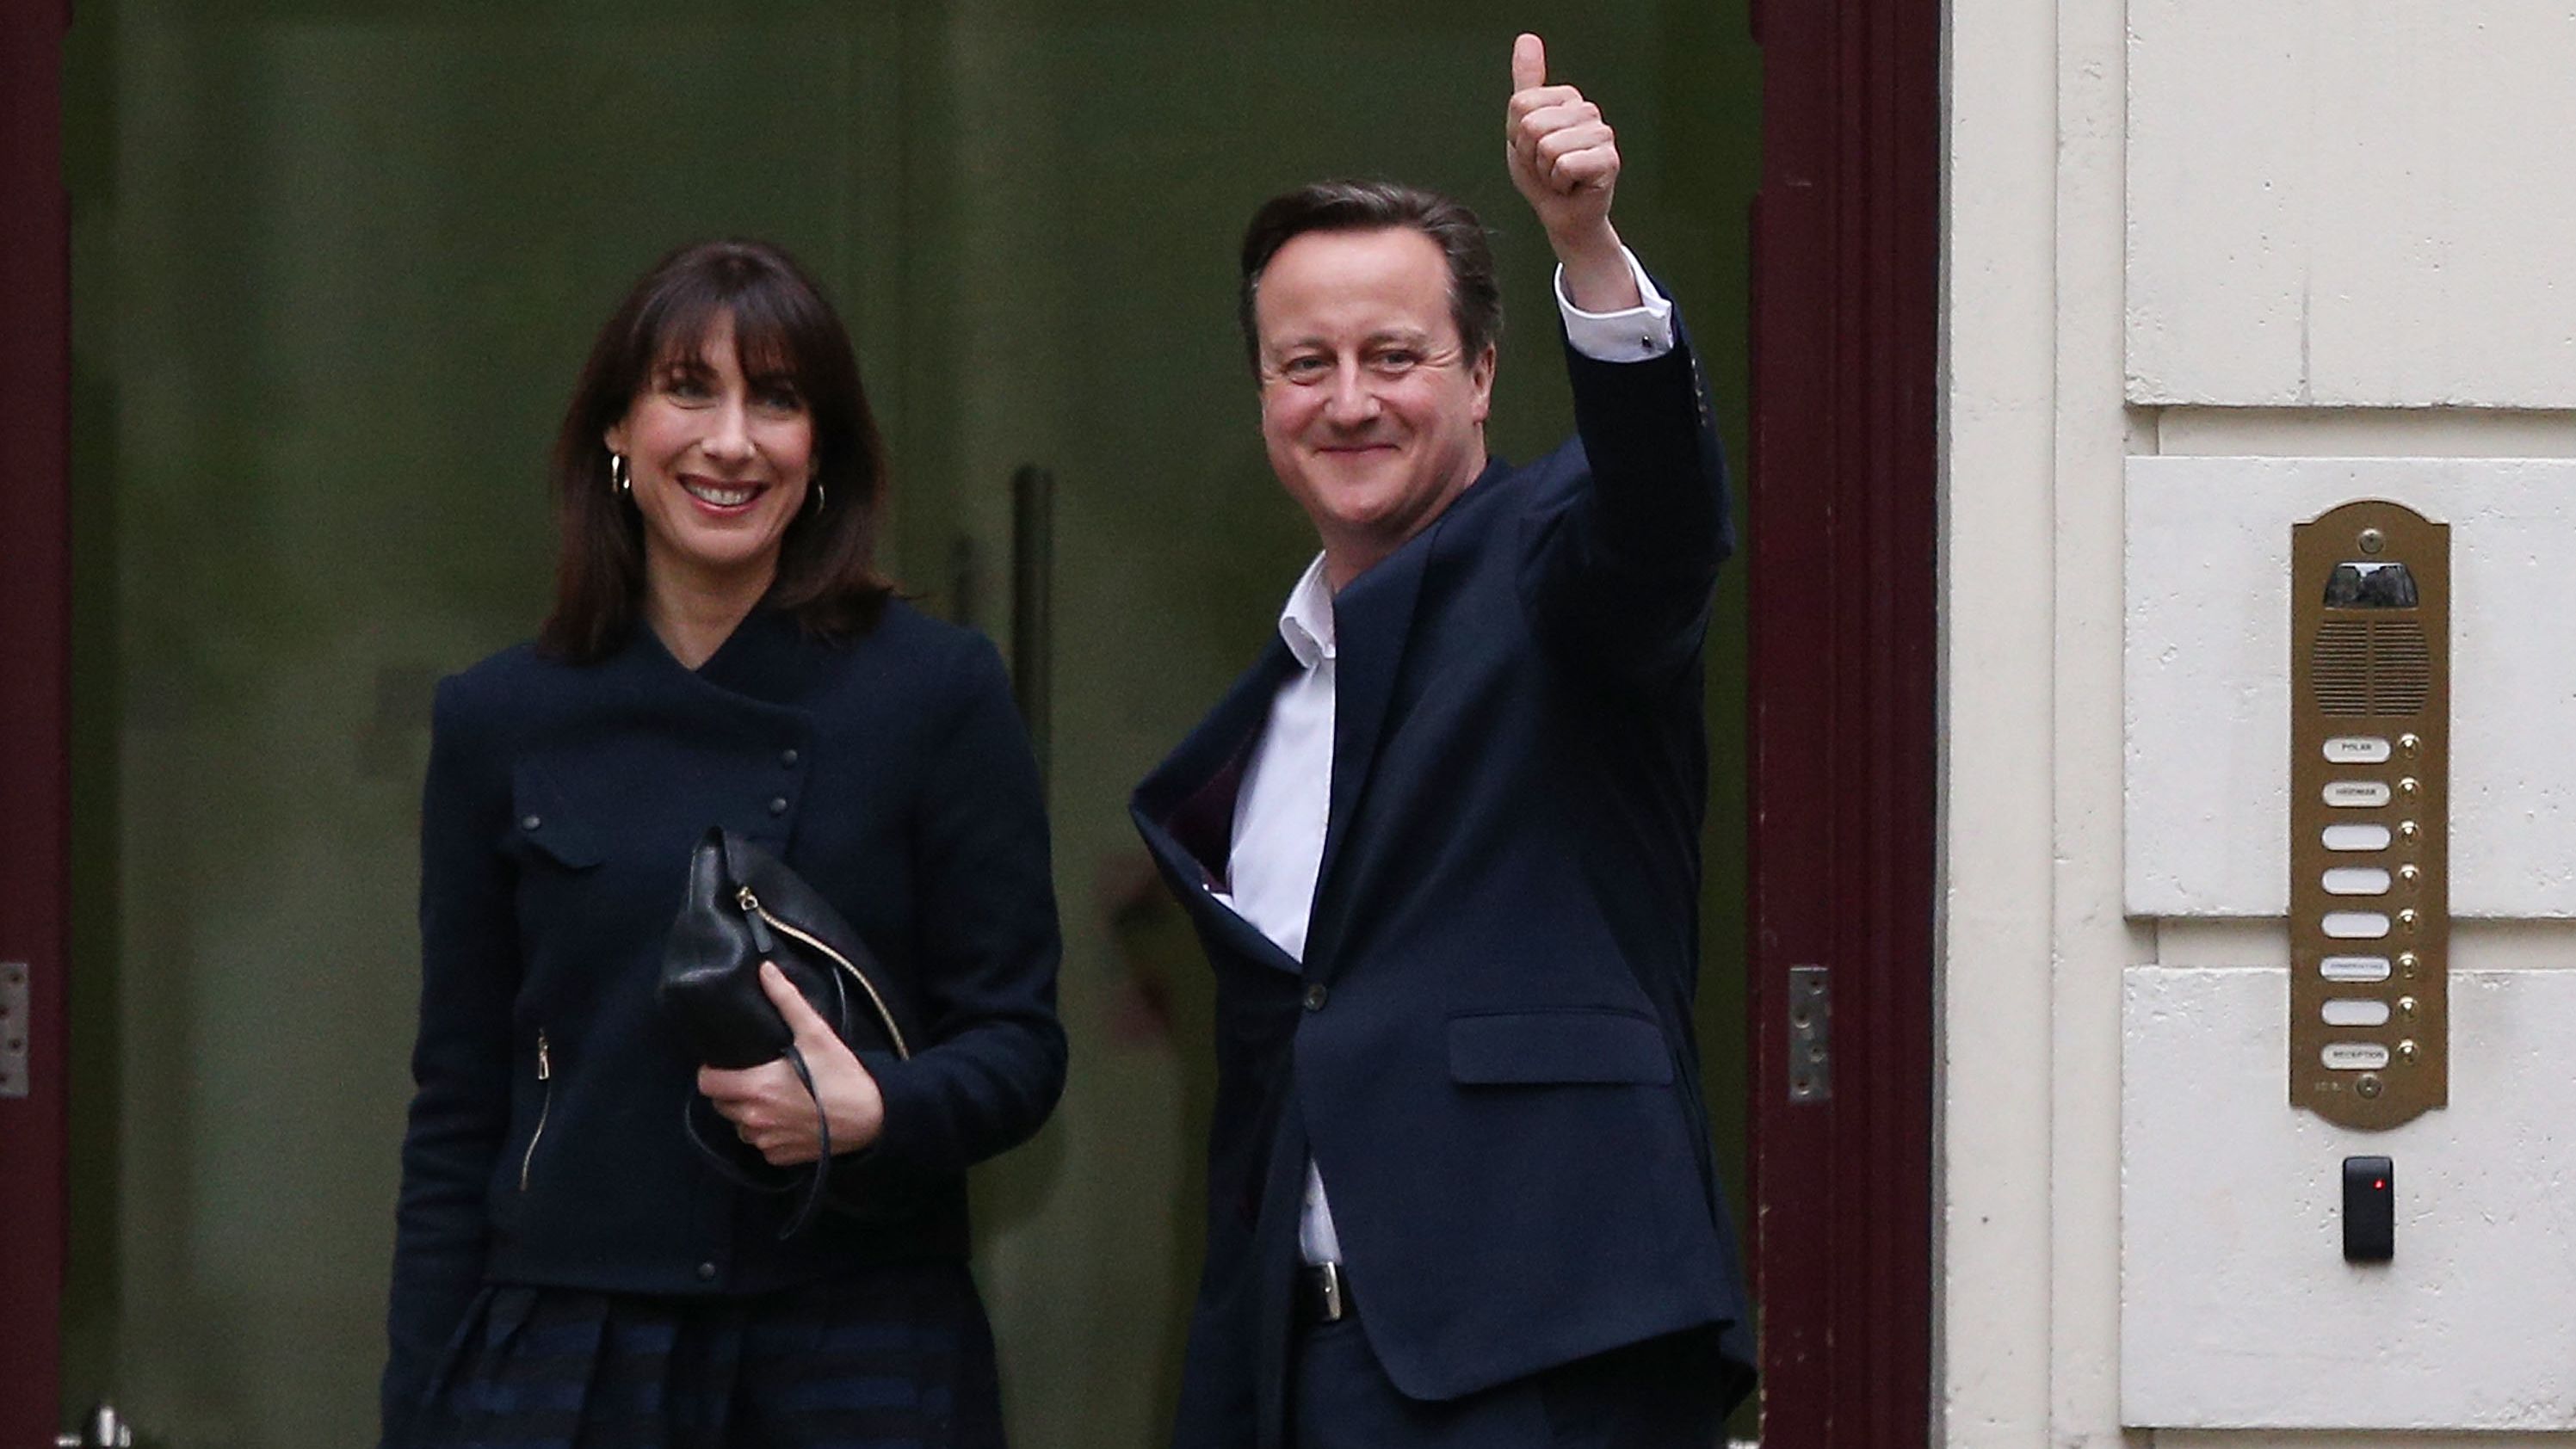 Prime Minister David Cameron arrives in London with his wife Samantha